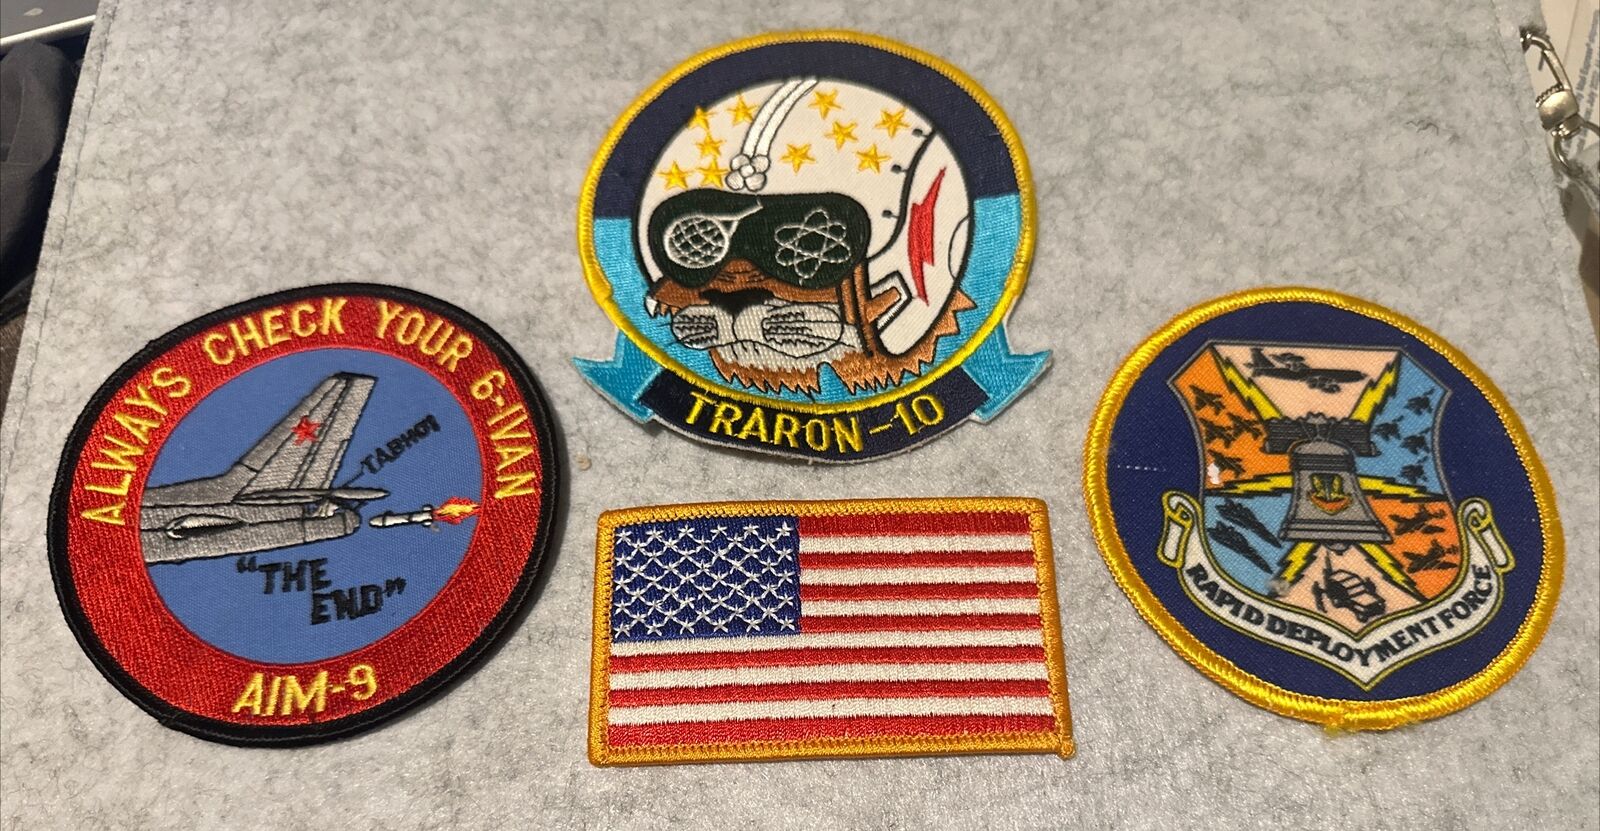 Lot Of (4) Military Patch Navy TRARON -10, 6-IVAN, Rapid Deployment Force, Flag